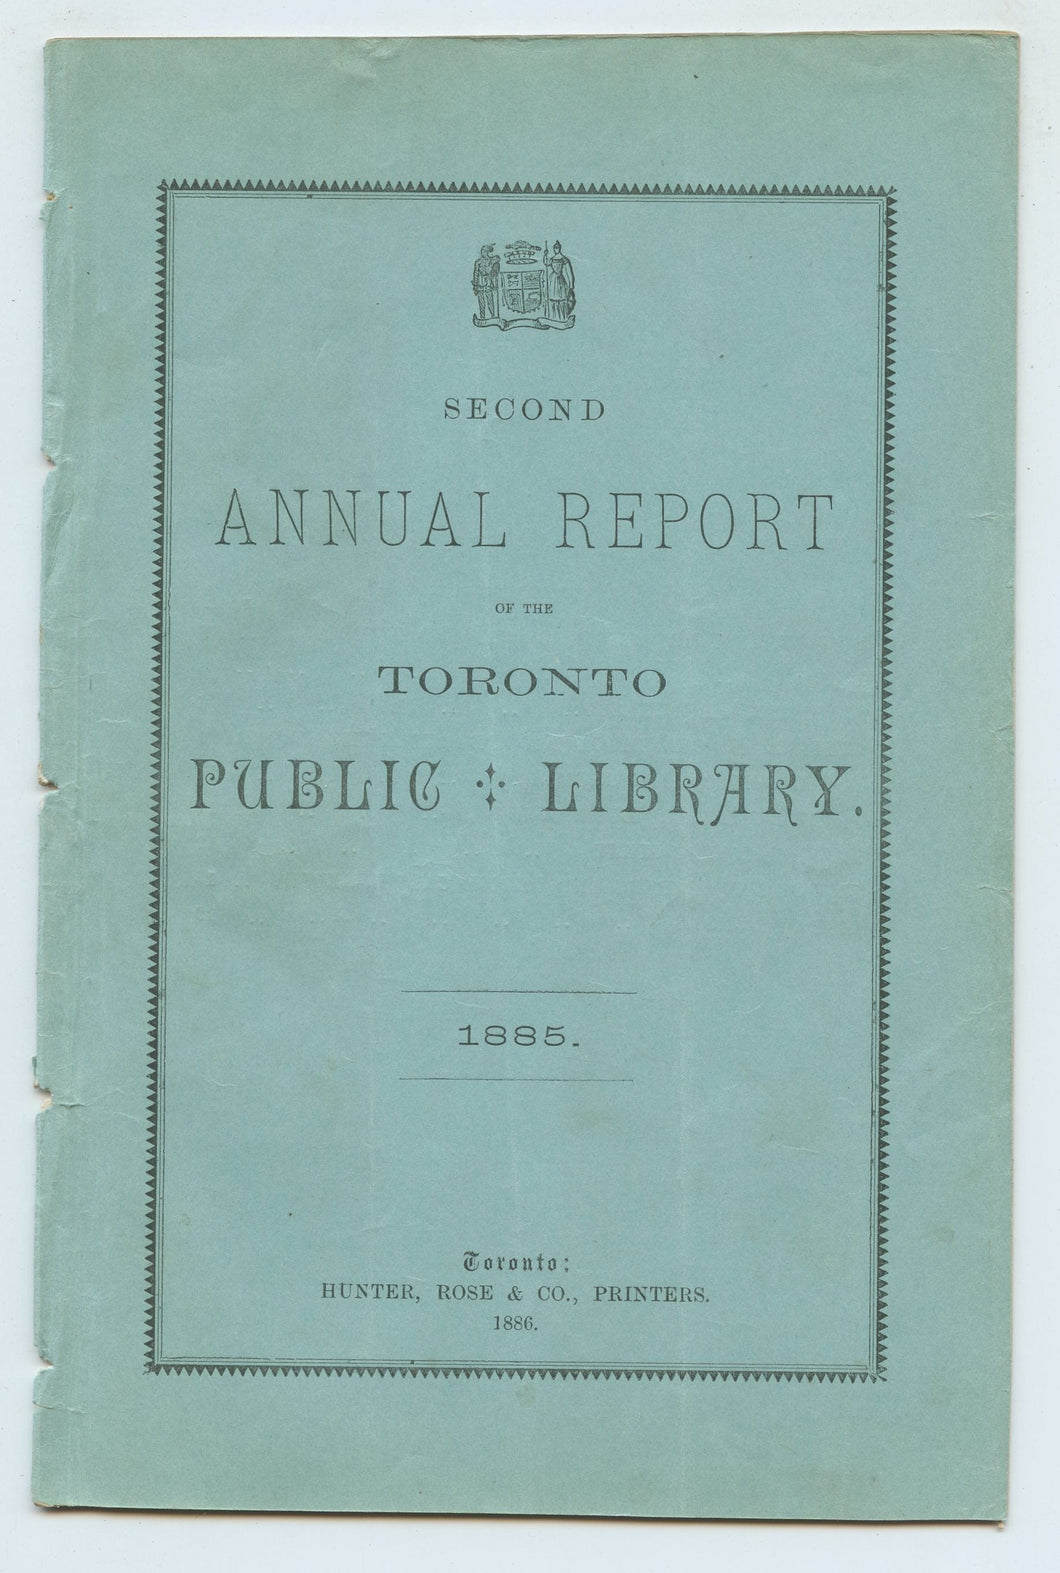 Second Annual Report of the Toronto Public Library